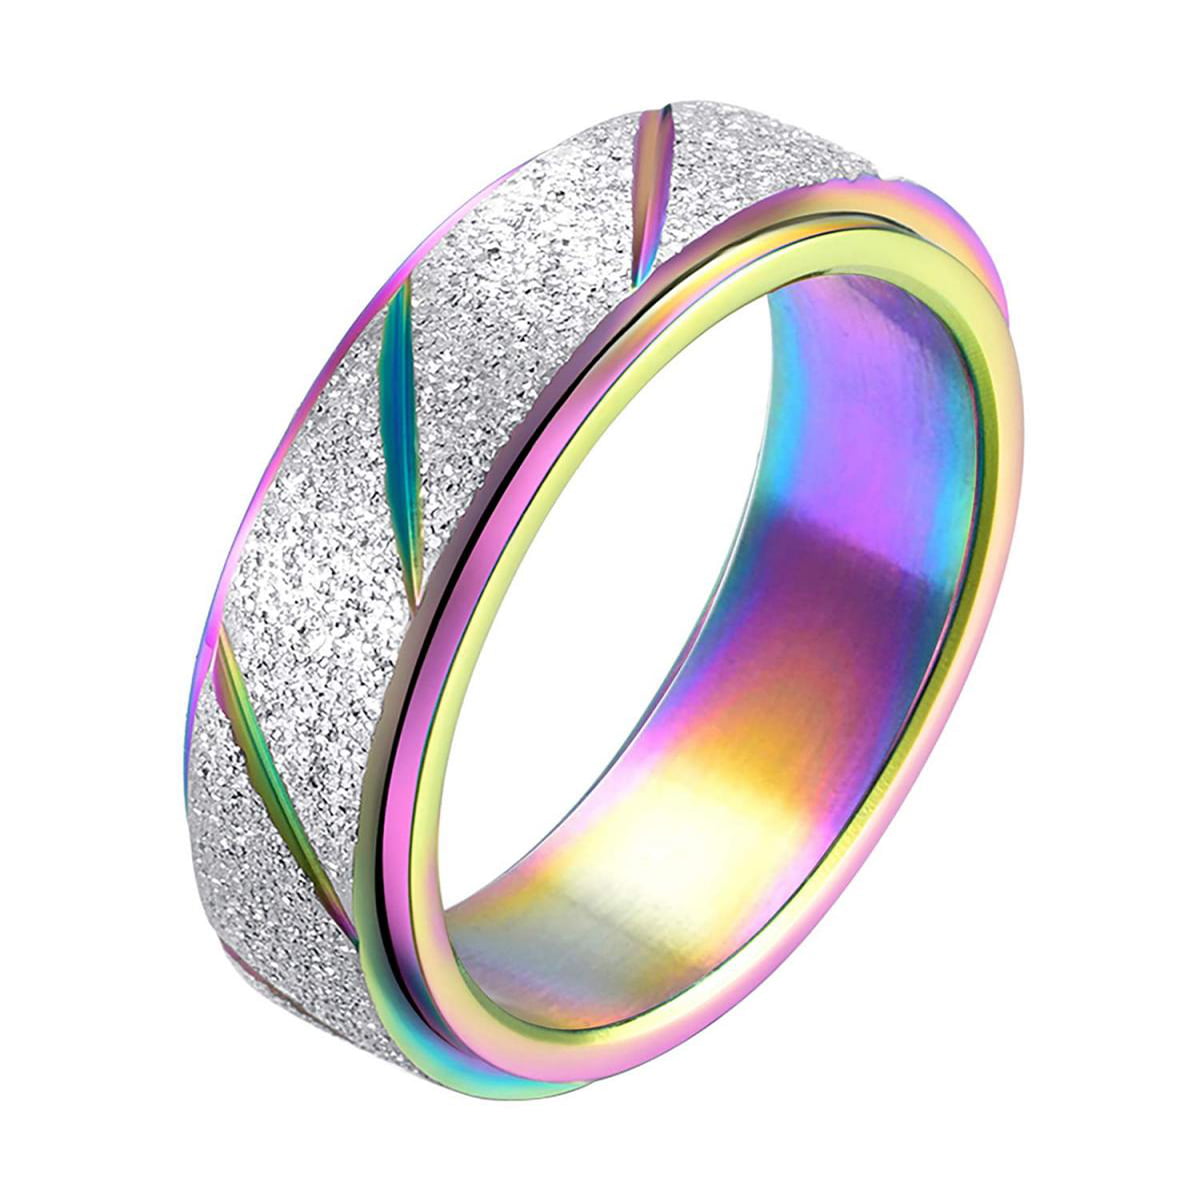 3 Pcs Spinner Ring Sand Blast Glitter Finish Fidget Ring Band Set Stress Relieving Band Ring Celtic Stress Relieving Wedding Promise Rings Set Gold Silver Rainbow Color Fidget Ring Band Set 